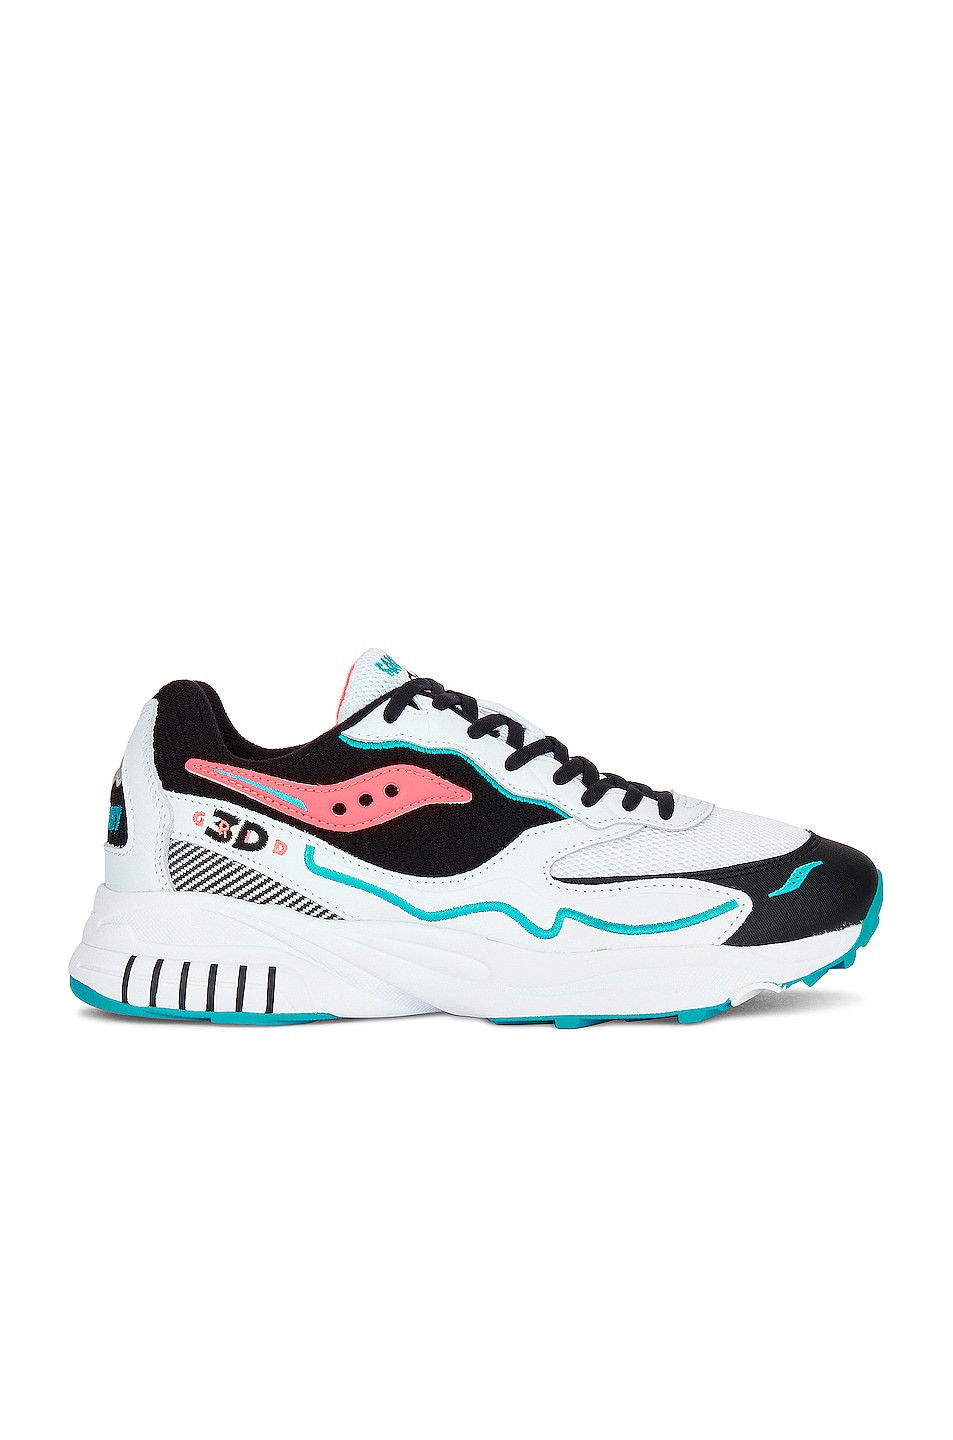 Image 1 of Saucony 3d Grid Hurricane Sneaker in White, Black, & Pink